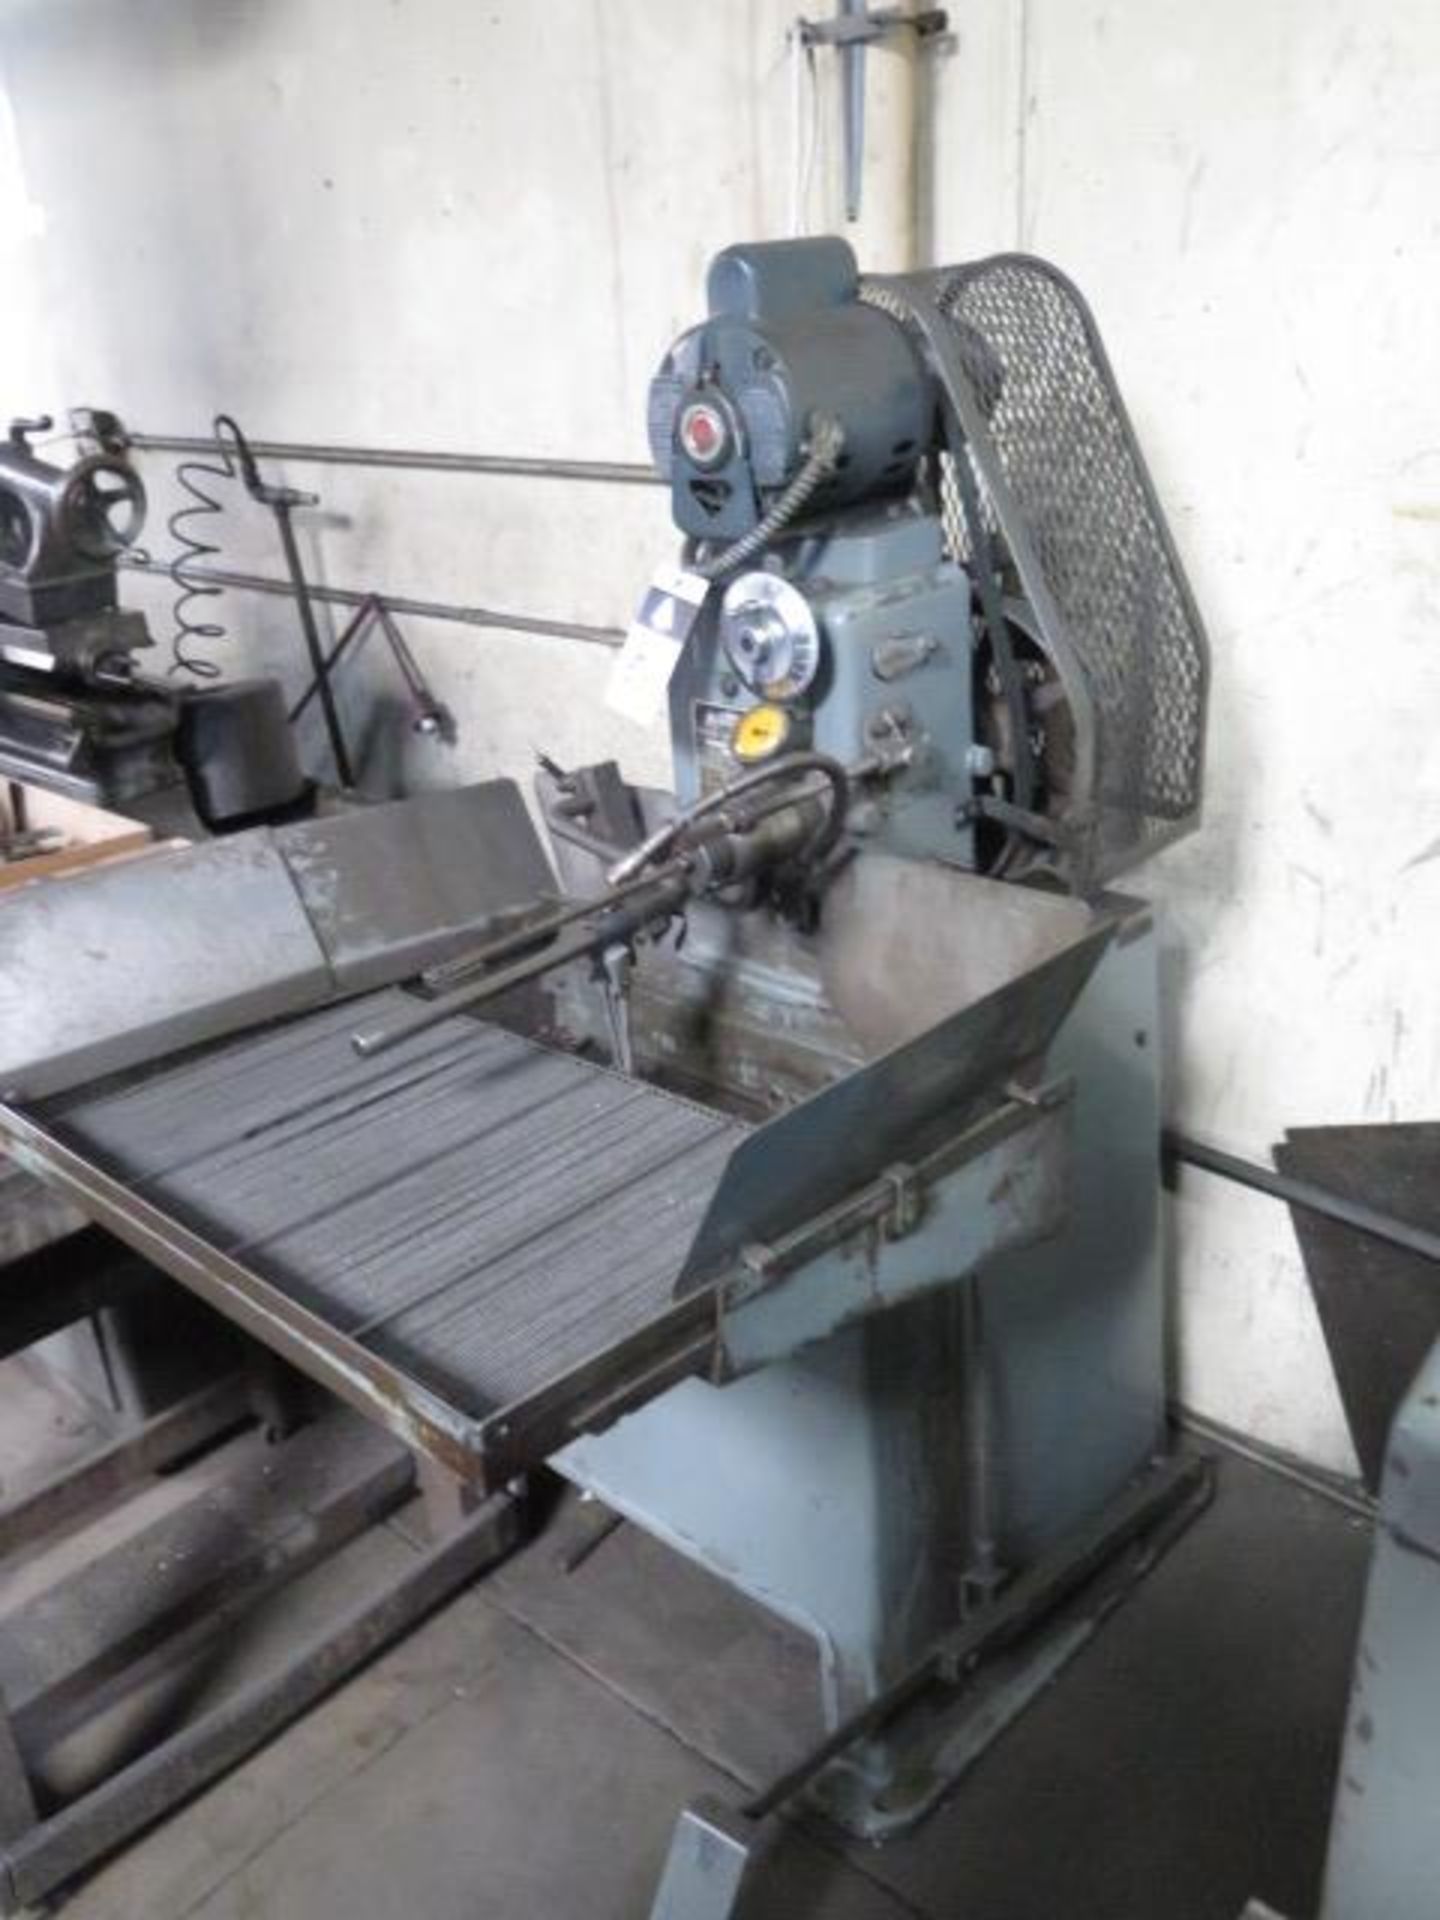 Sunnen MBB-1290D Precision Honing Machine s/n 18970 w/ Coolant (SOLD AS-IS - NO WARRANTY) - Image 2 of 7